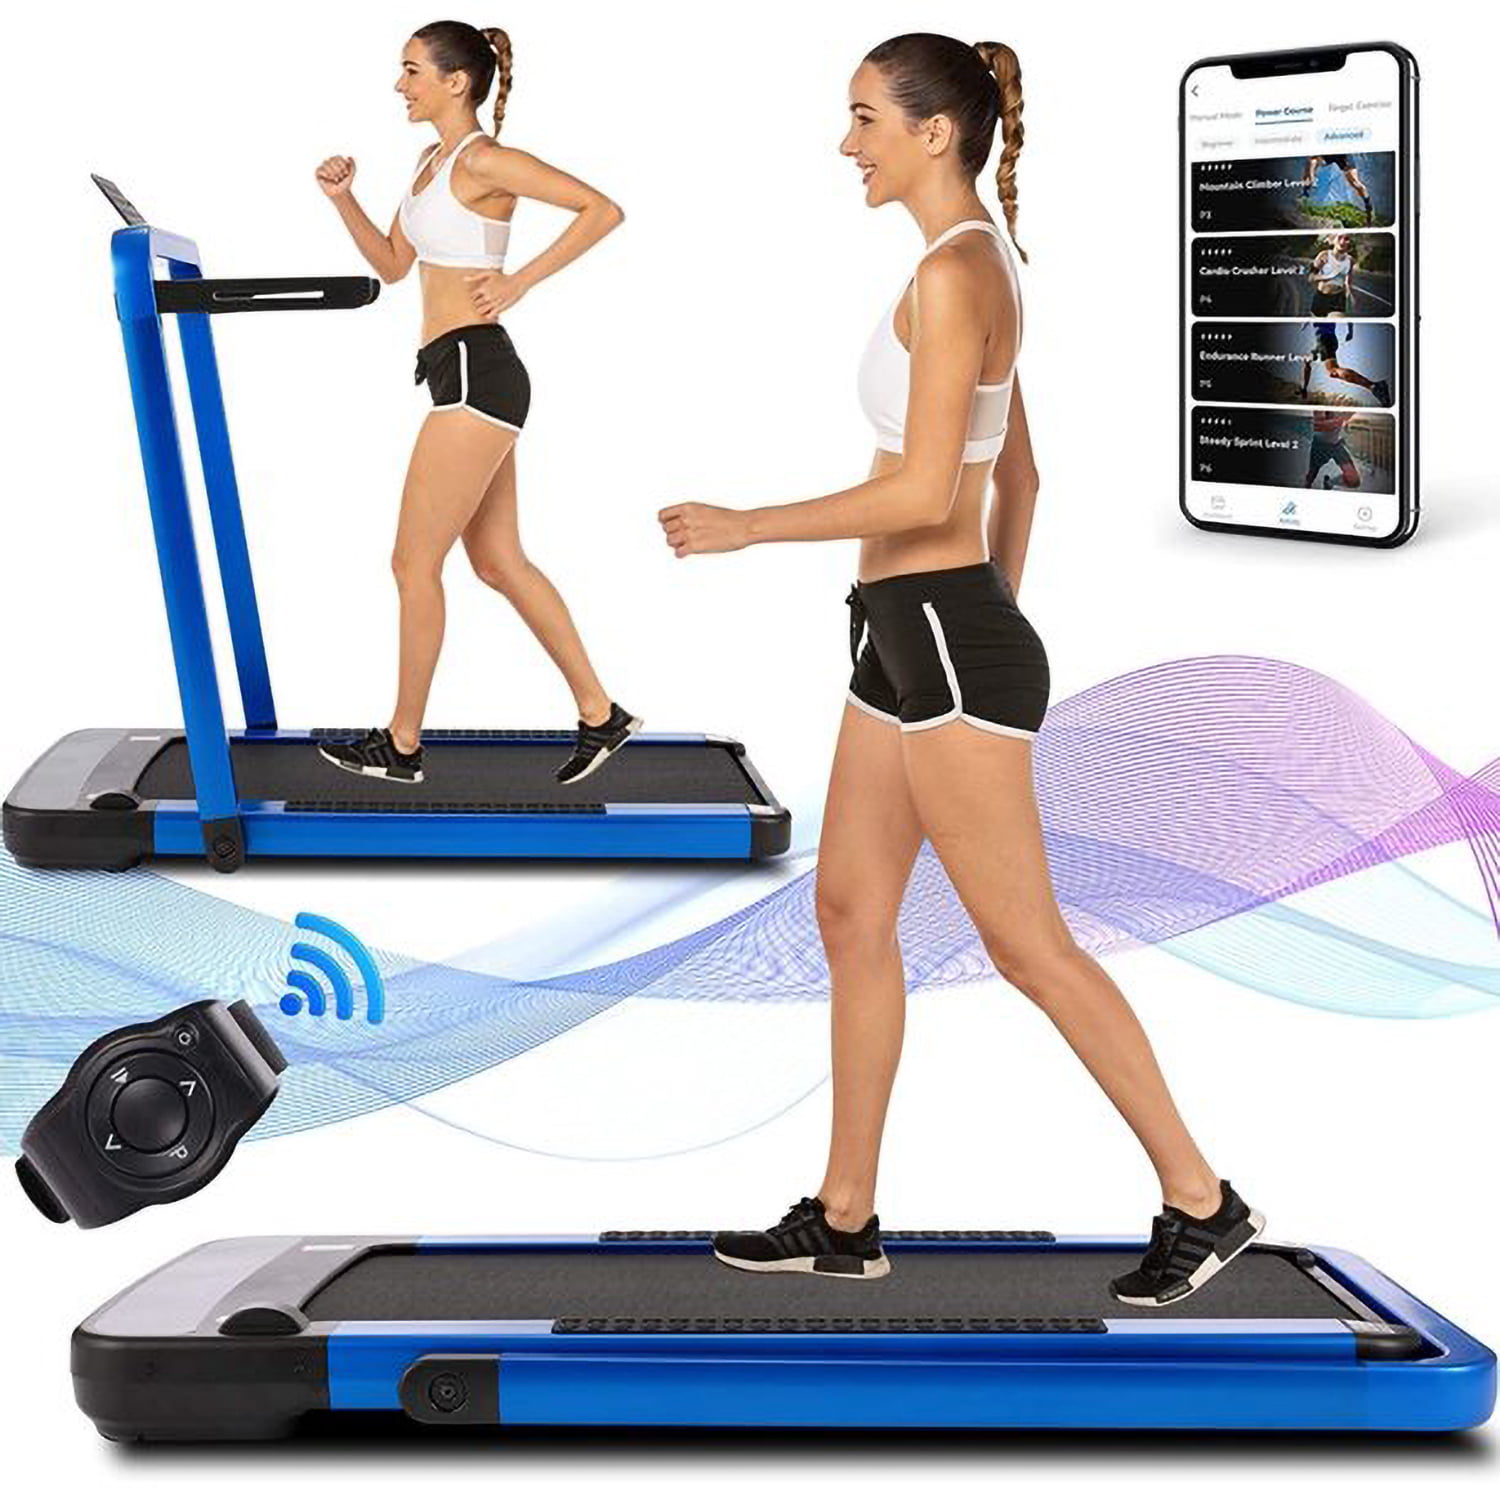 FUNMILY Treadmill for Home Portable Electric Treadmill Machine for Running Walking Jogging Workout Folding Treadmills with Desk and Bluetooth Speaker 265 LBS Weight Capacity M0513 